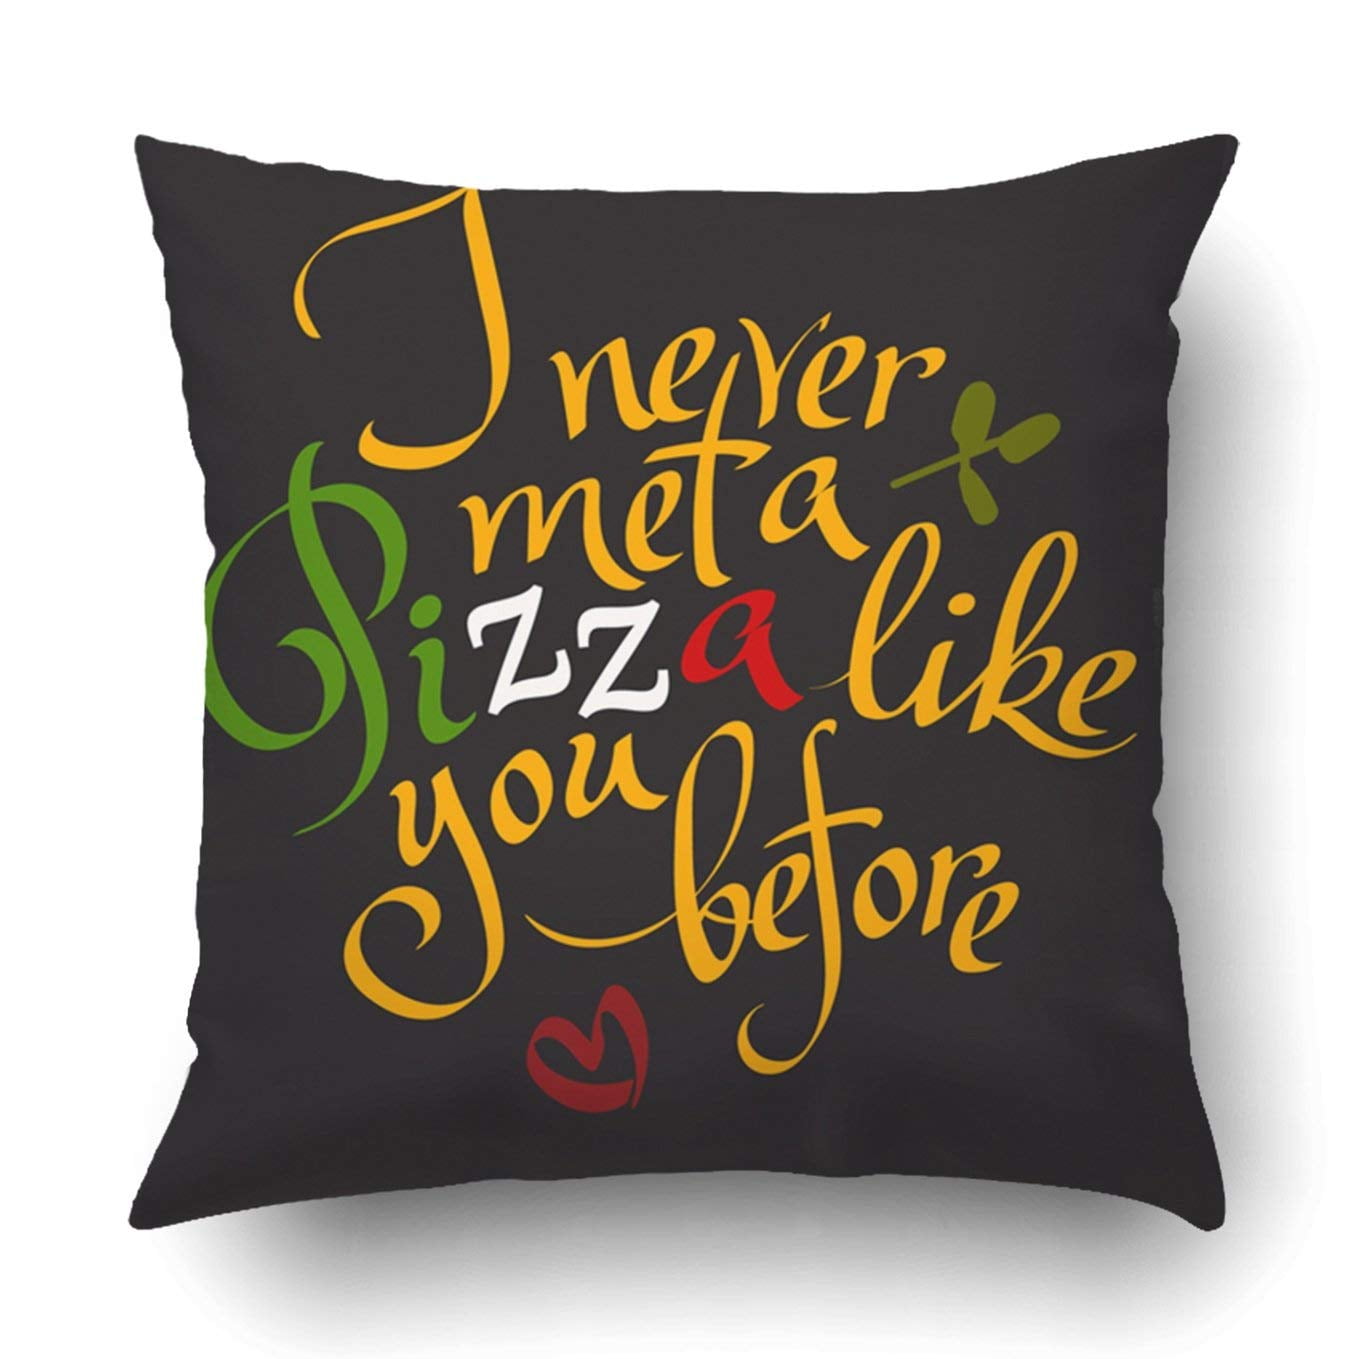 Pizza Princess Funny Pizza Lover Throw Pillow Multicolor 16x16